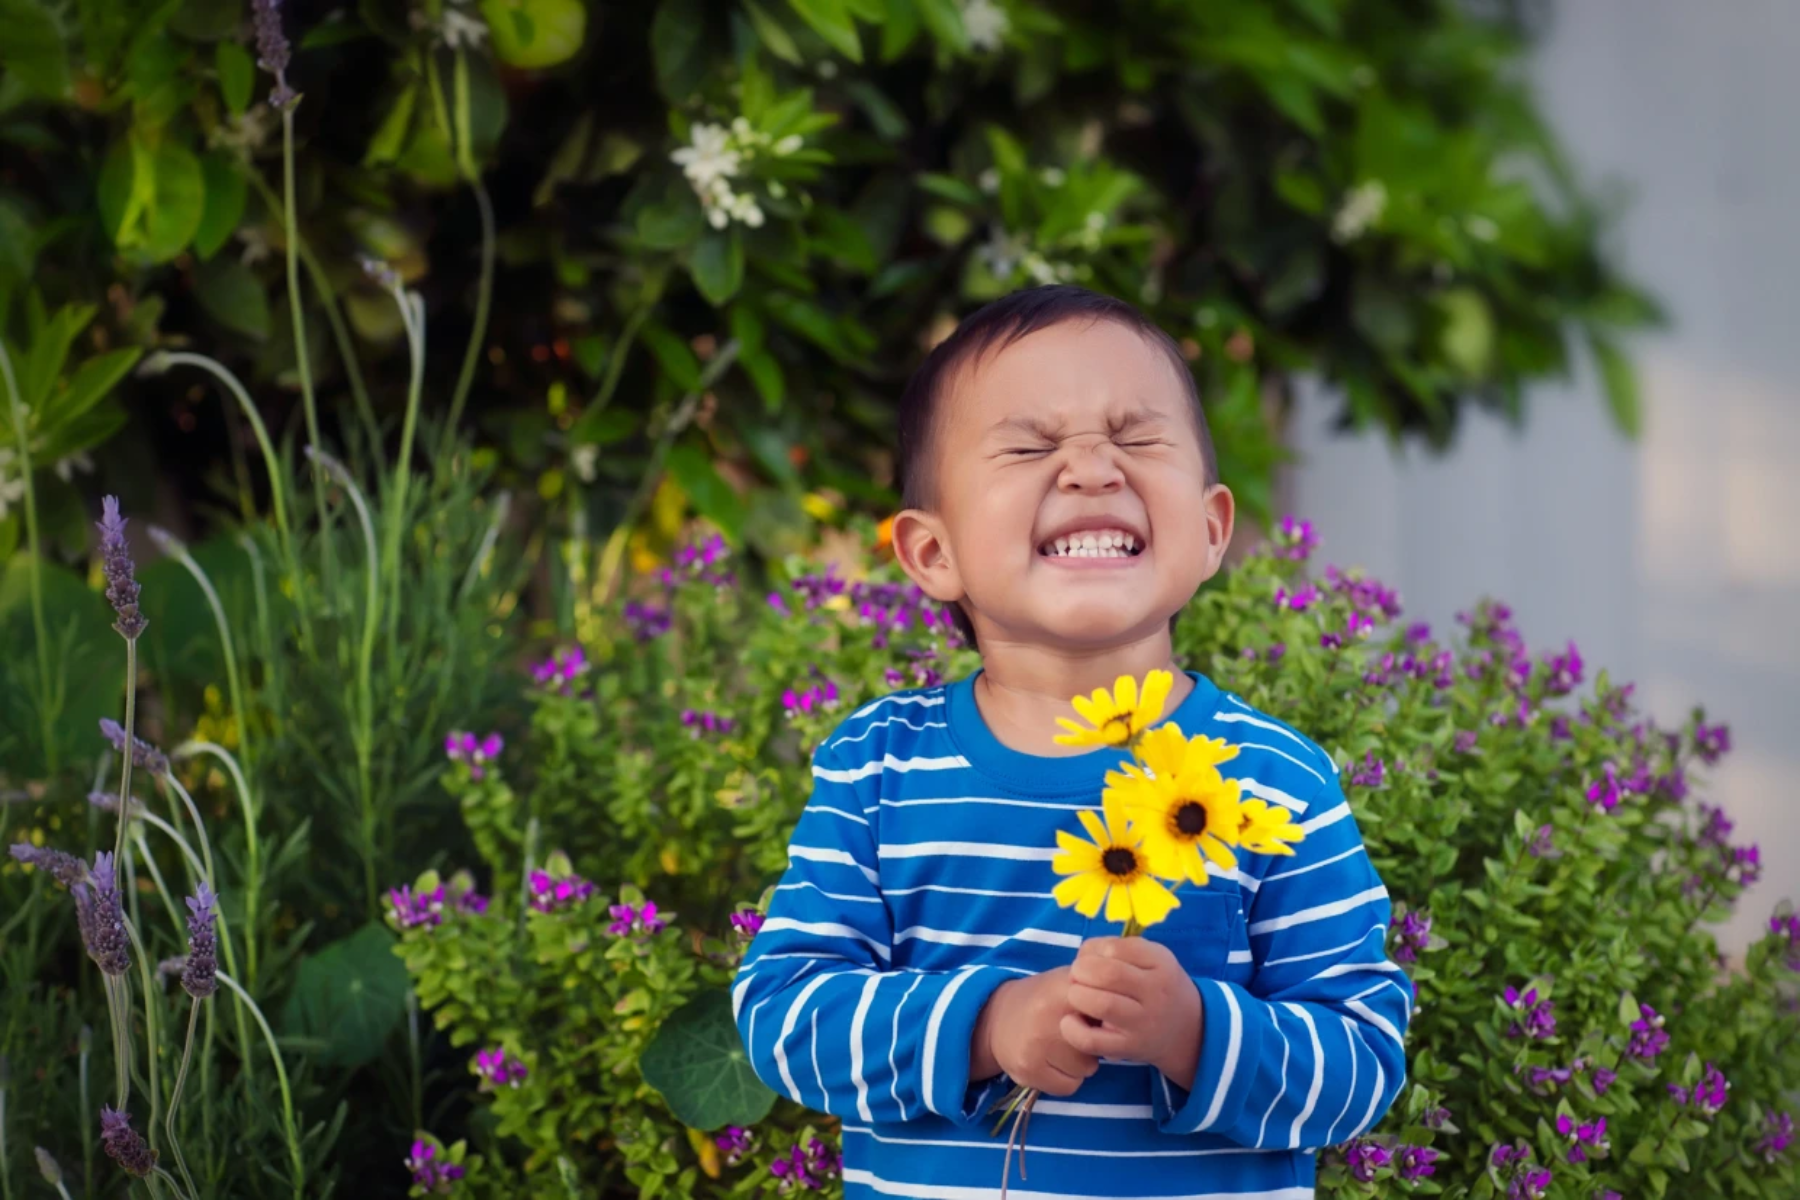 small child with a super big grin holding sunflowers in front of a purply-flowered bush.